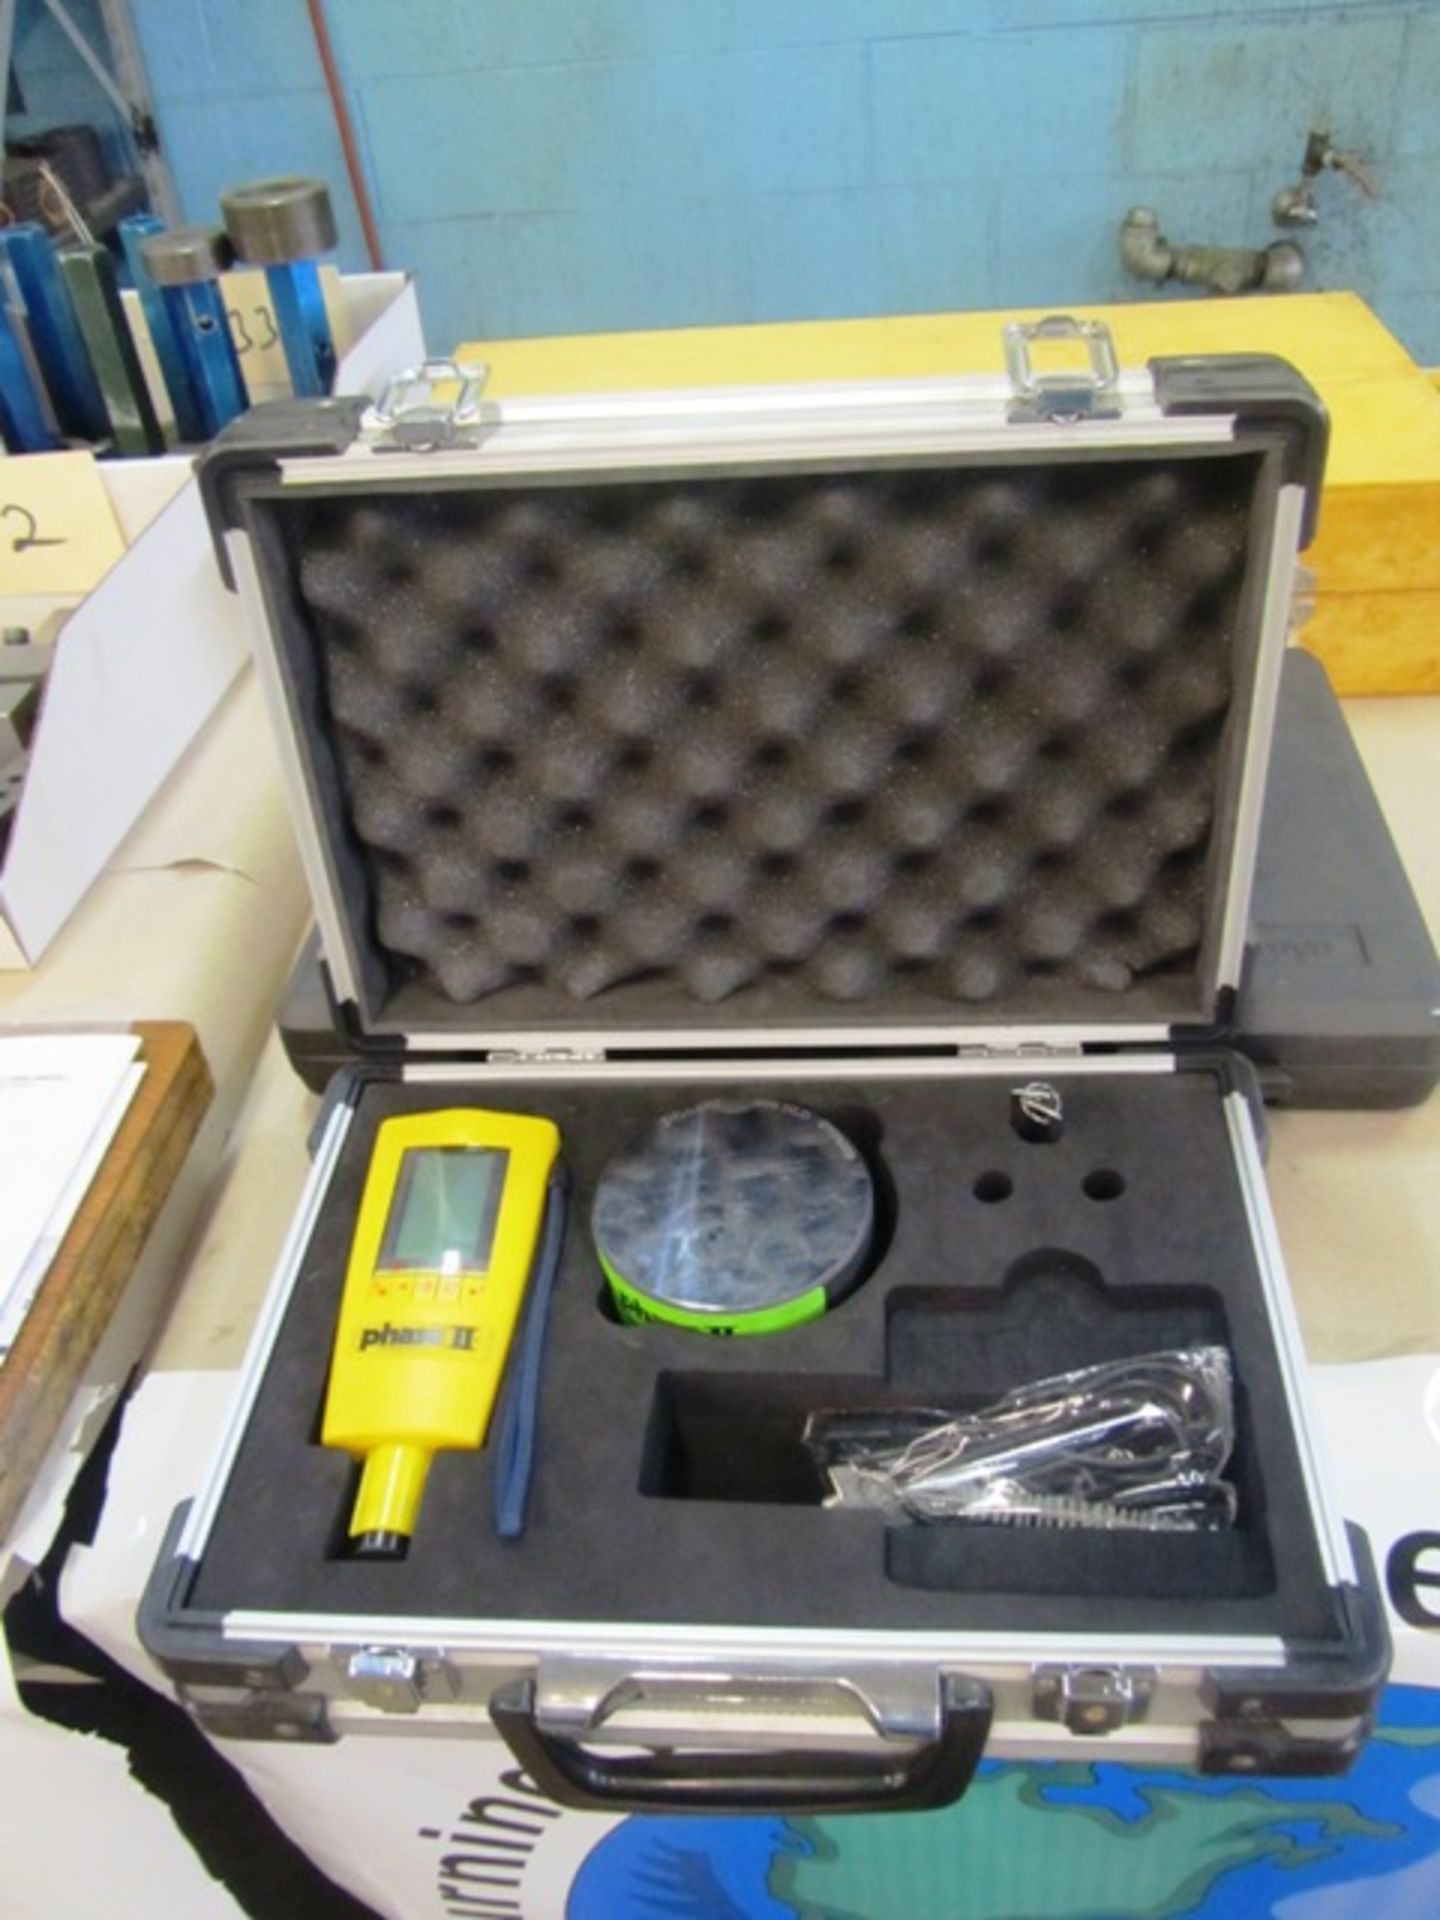 Phase II Model PHT-2000 Portable Digital Integrated Hardness Tester